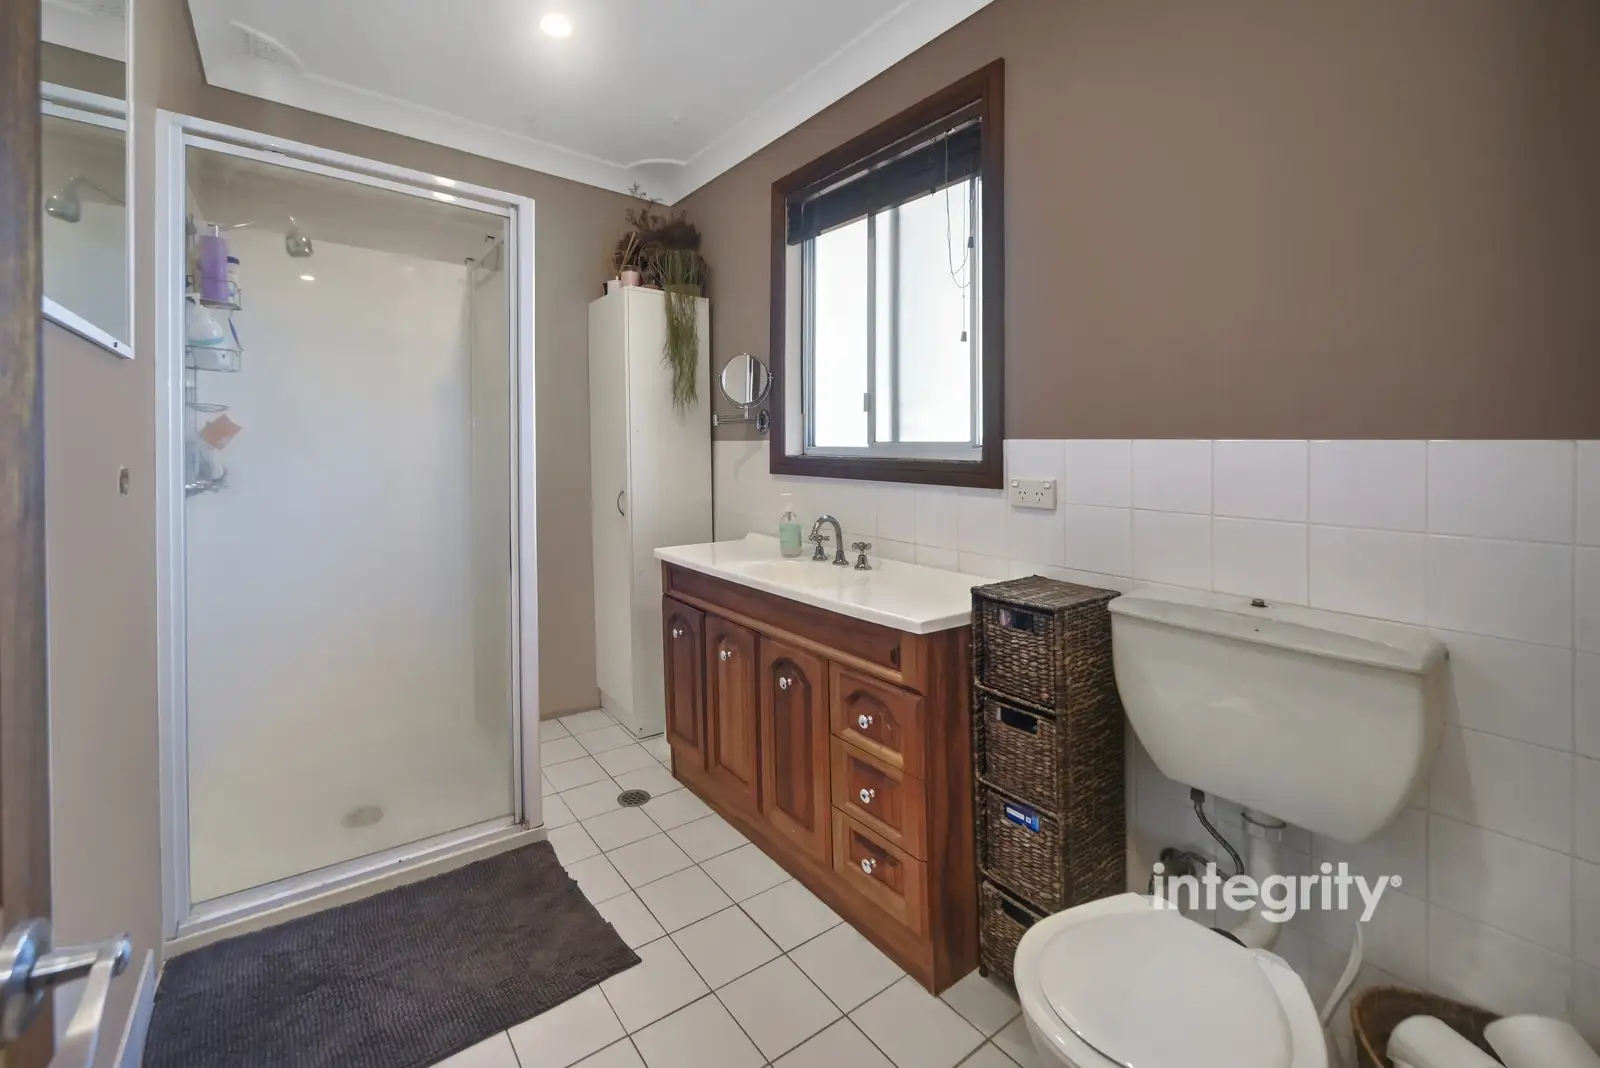 21 Haiser Road, Greenwell Point For Sale by Integrity Real Estate - image 9